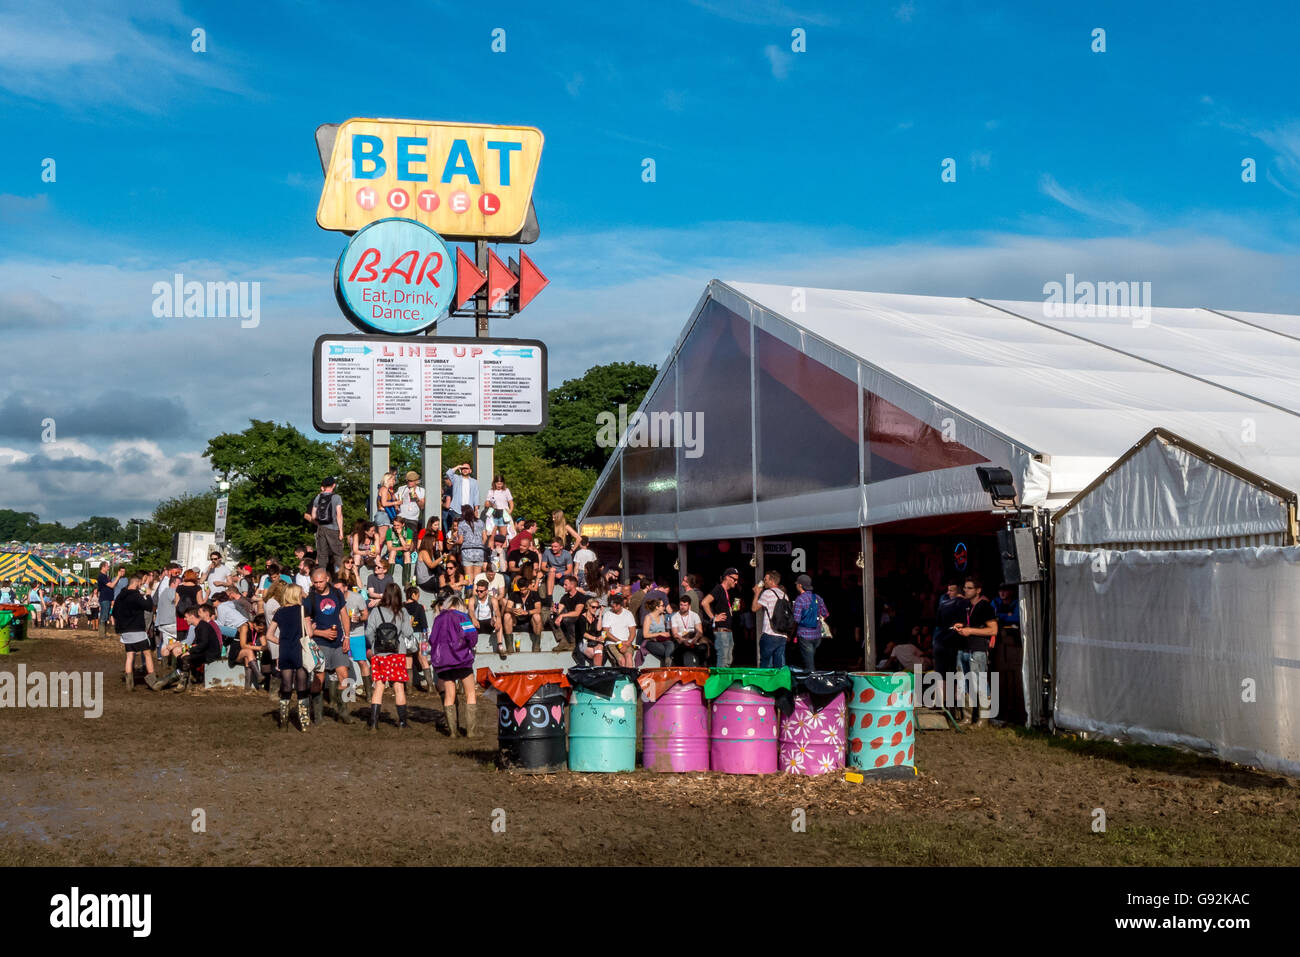 The Beat Hotel at The 2016 Glastonbury Festival of Contemporary Performing Arts. Stock Photo